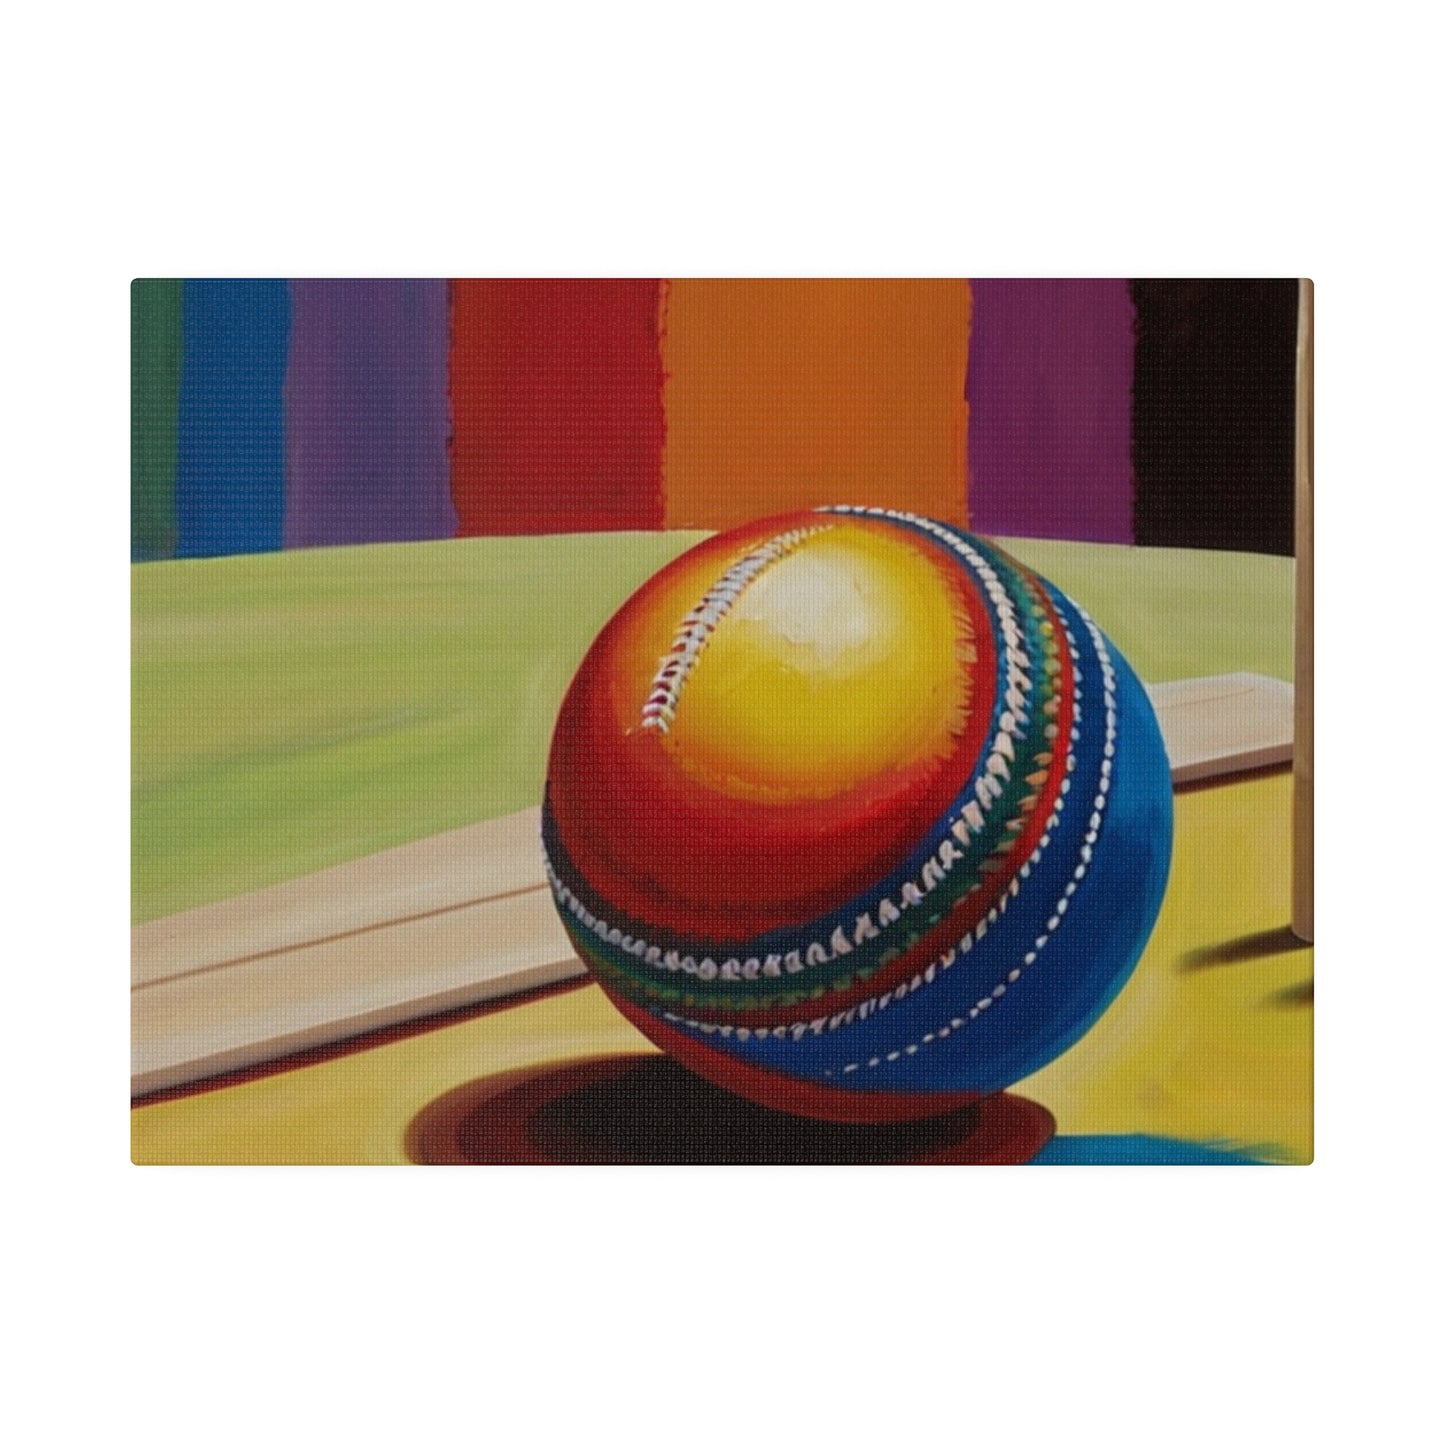 Colourful Cricket Ball Canvas - Matte Canvas, Stretched, 0.75"